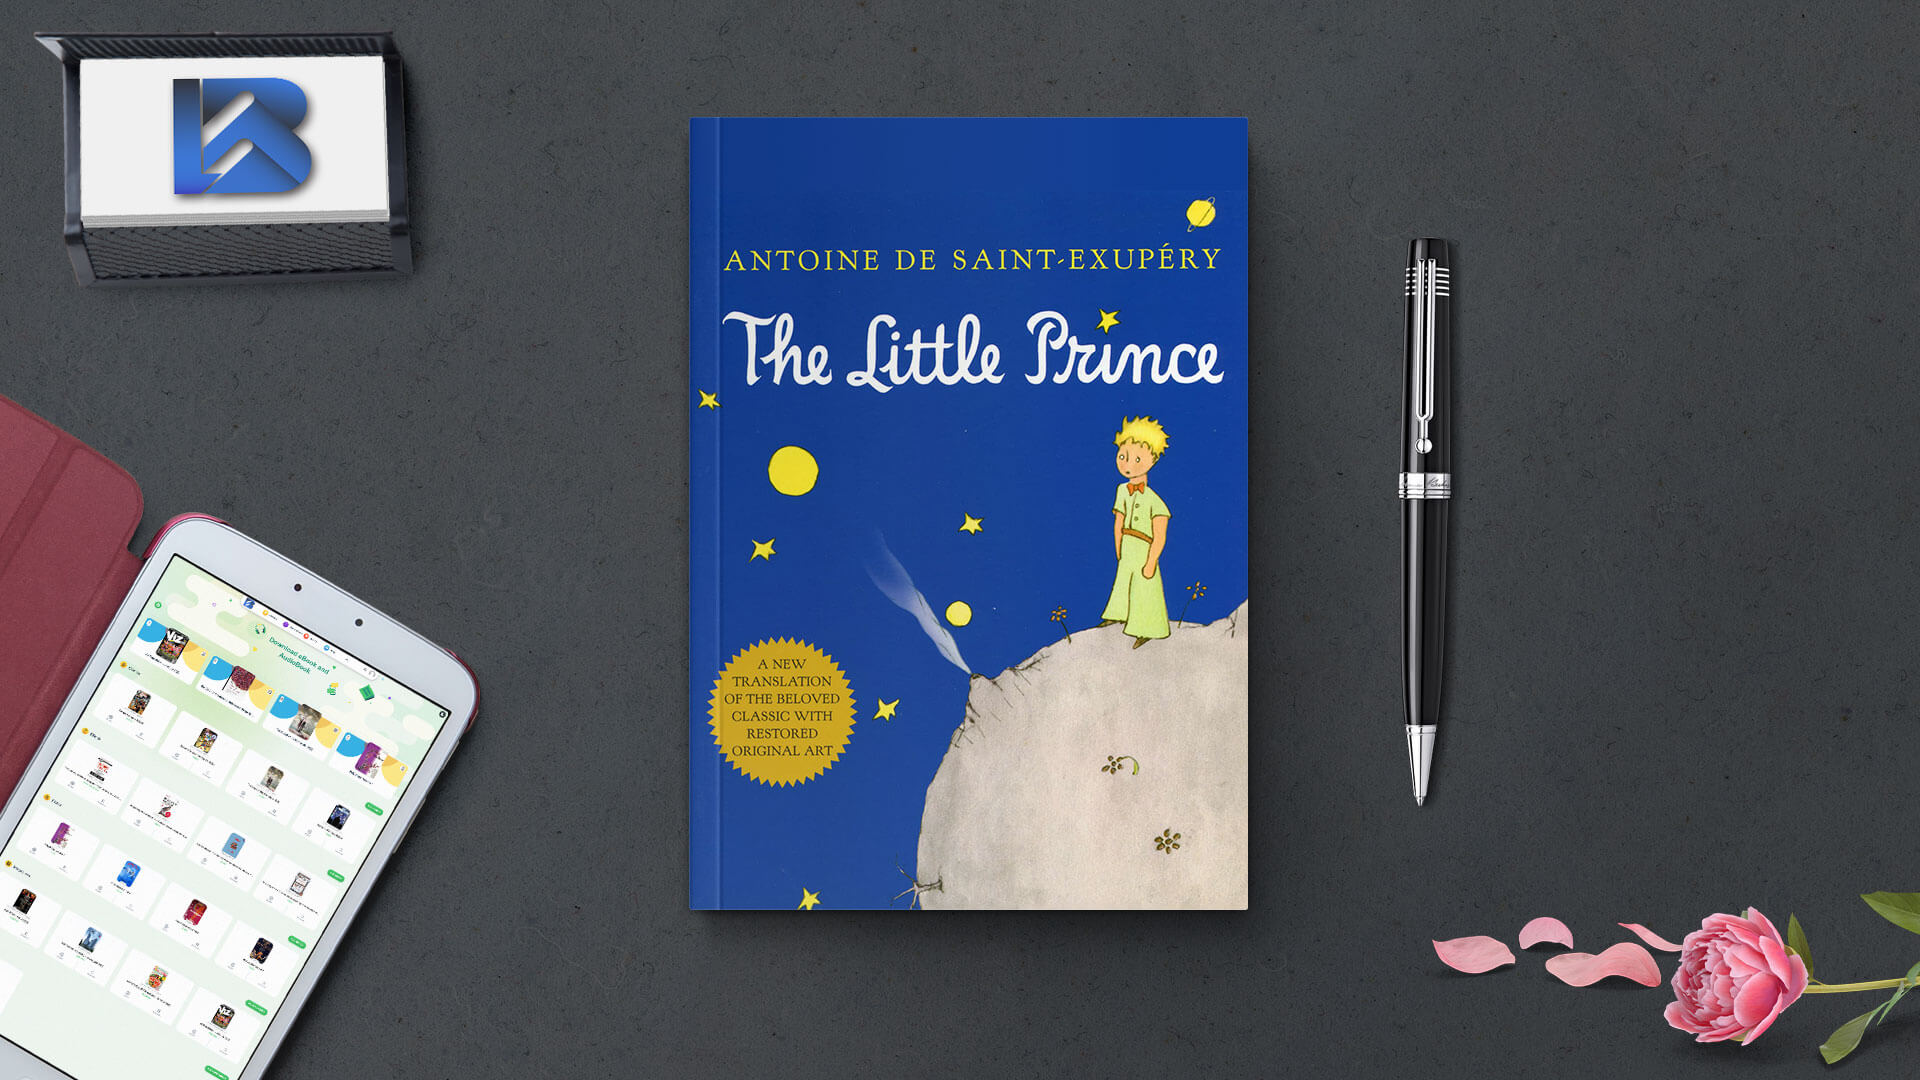 Download Free The Little Prince 2000 pdf